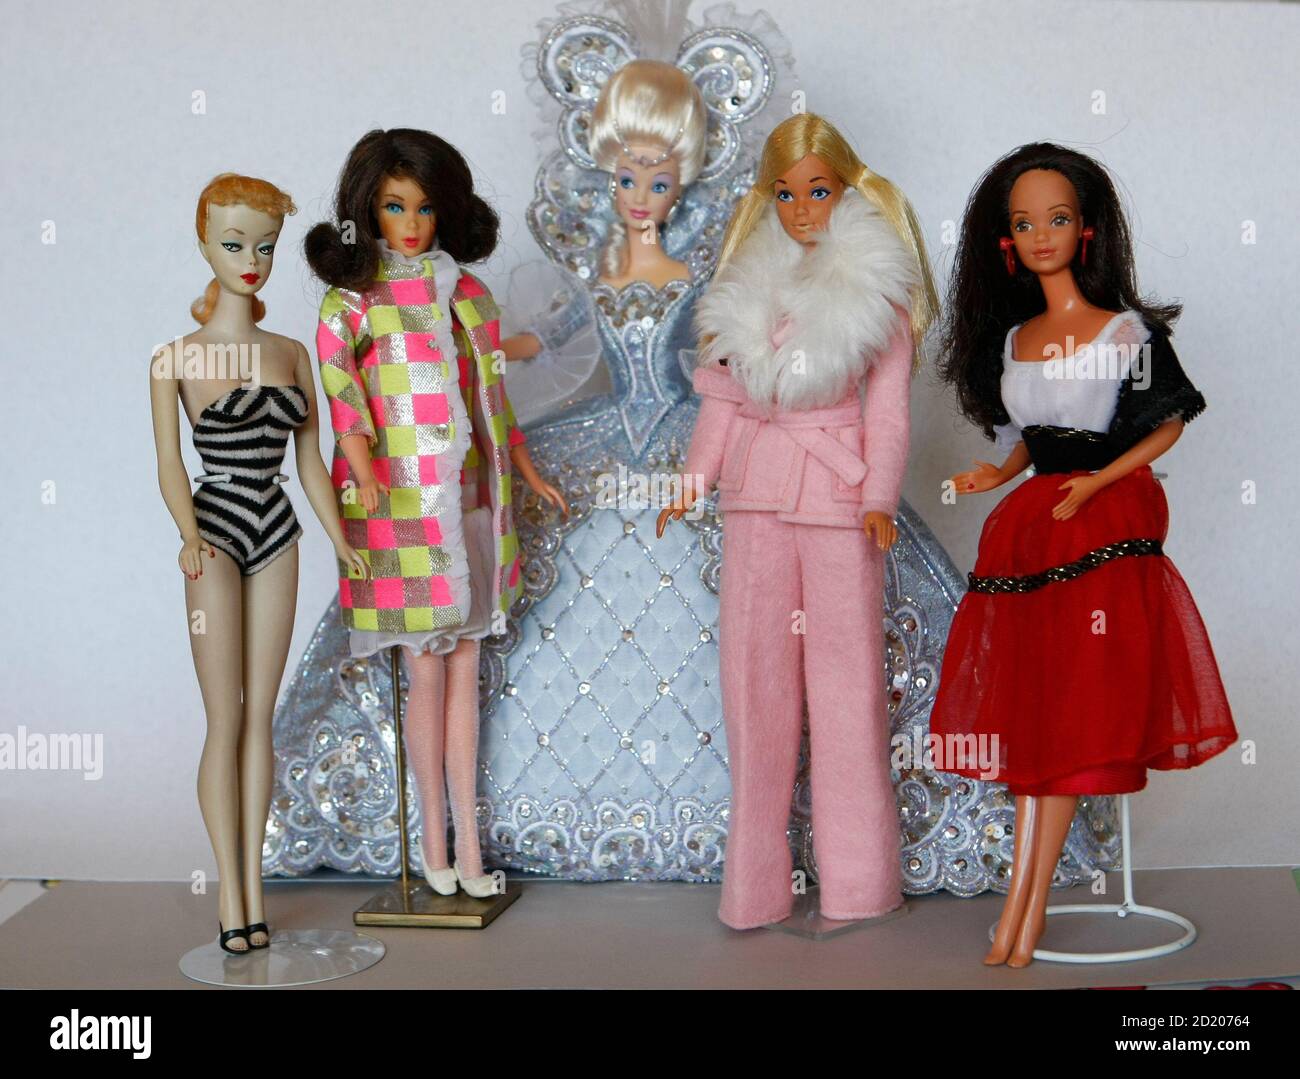 Barbie dolls from the 50s, 60s, 90s, 70s and 80s (L-R) are pictured in  Duesseldorf February 3, 2009. Bettina Dorfmann owns more than 6,000 Barbie  dolls and has one of the biggest